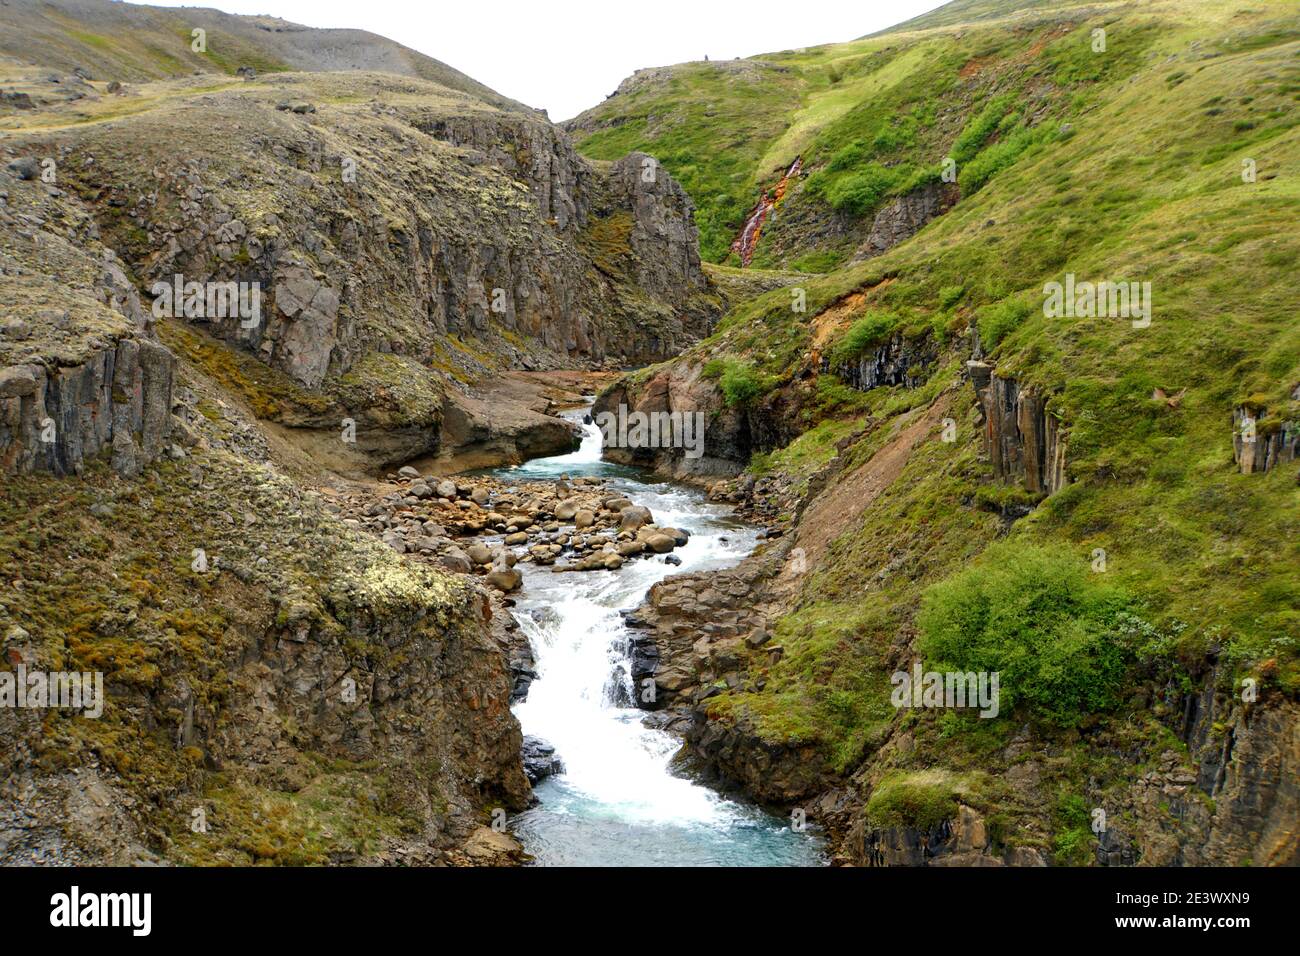 The view of a remote waterfalls off Route 1 near Jokuldalur, Iceland in the summer Stock Photo